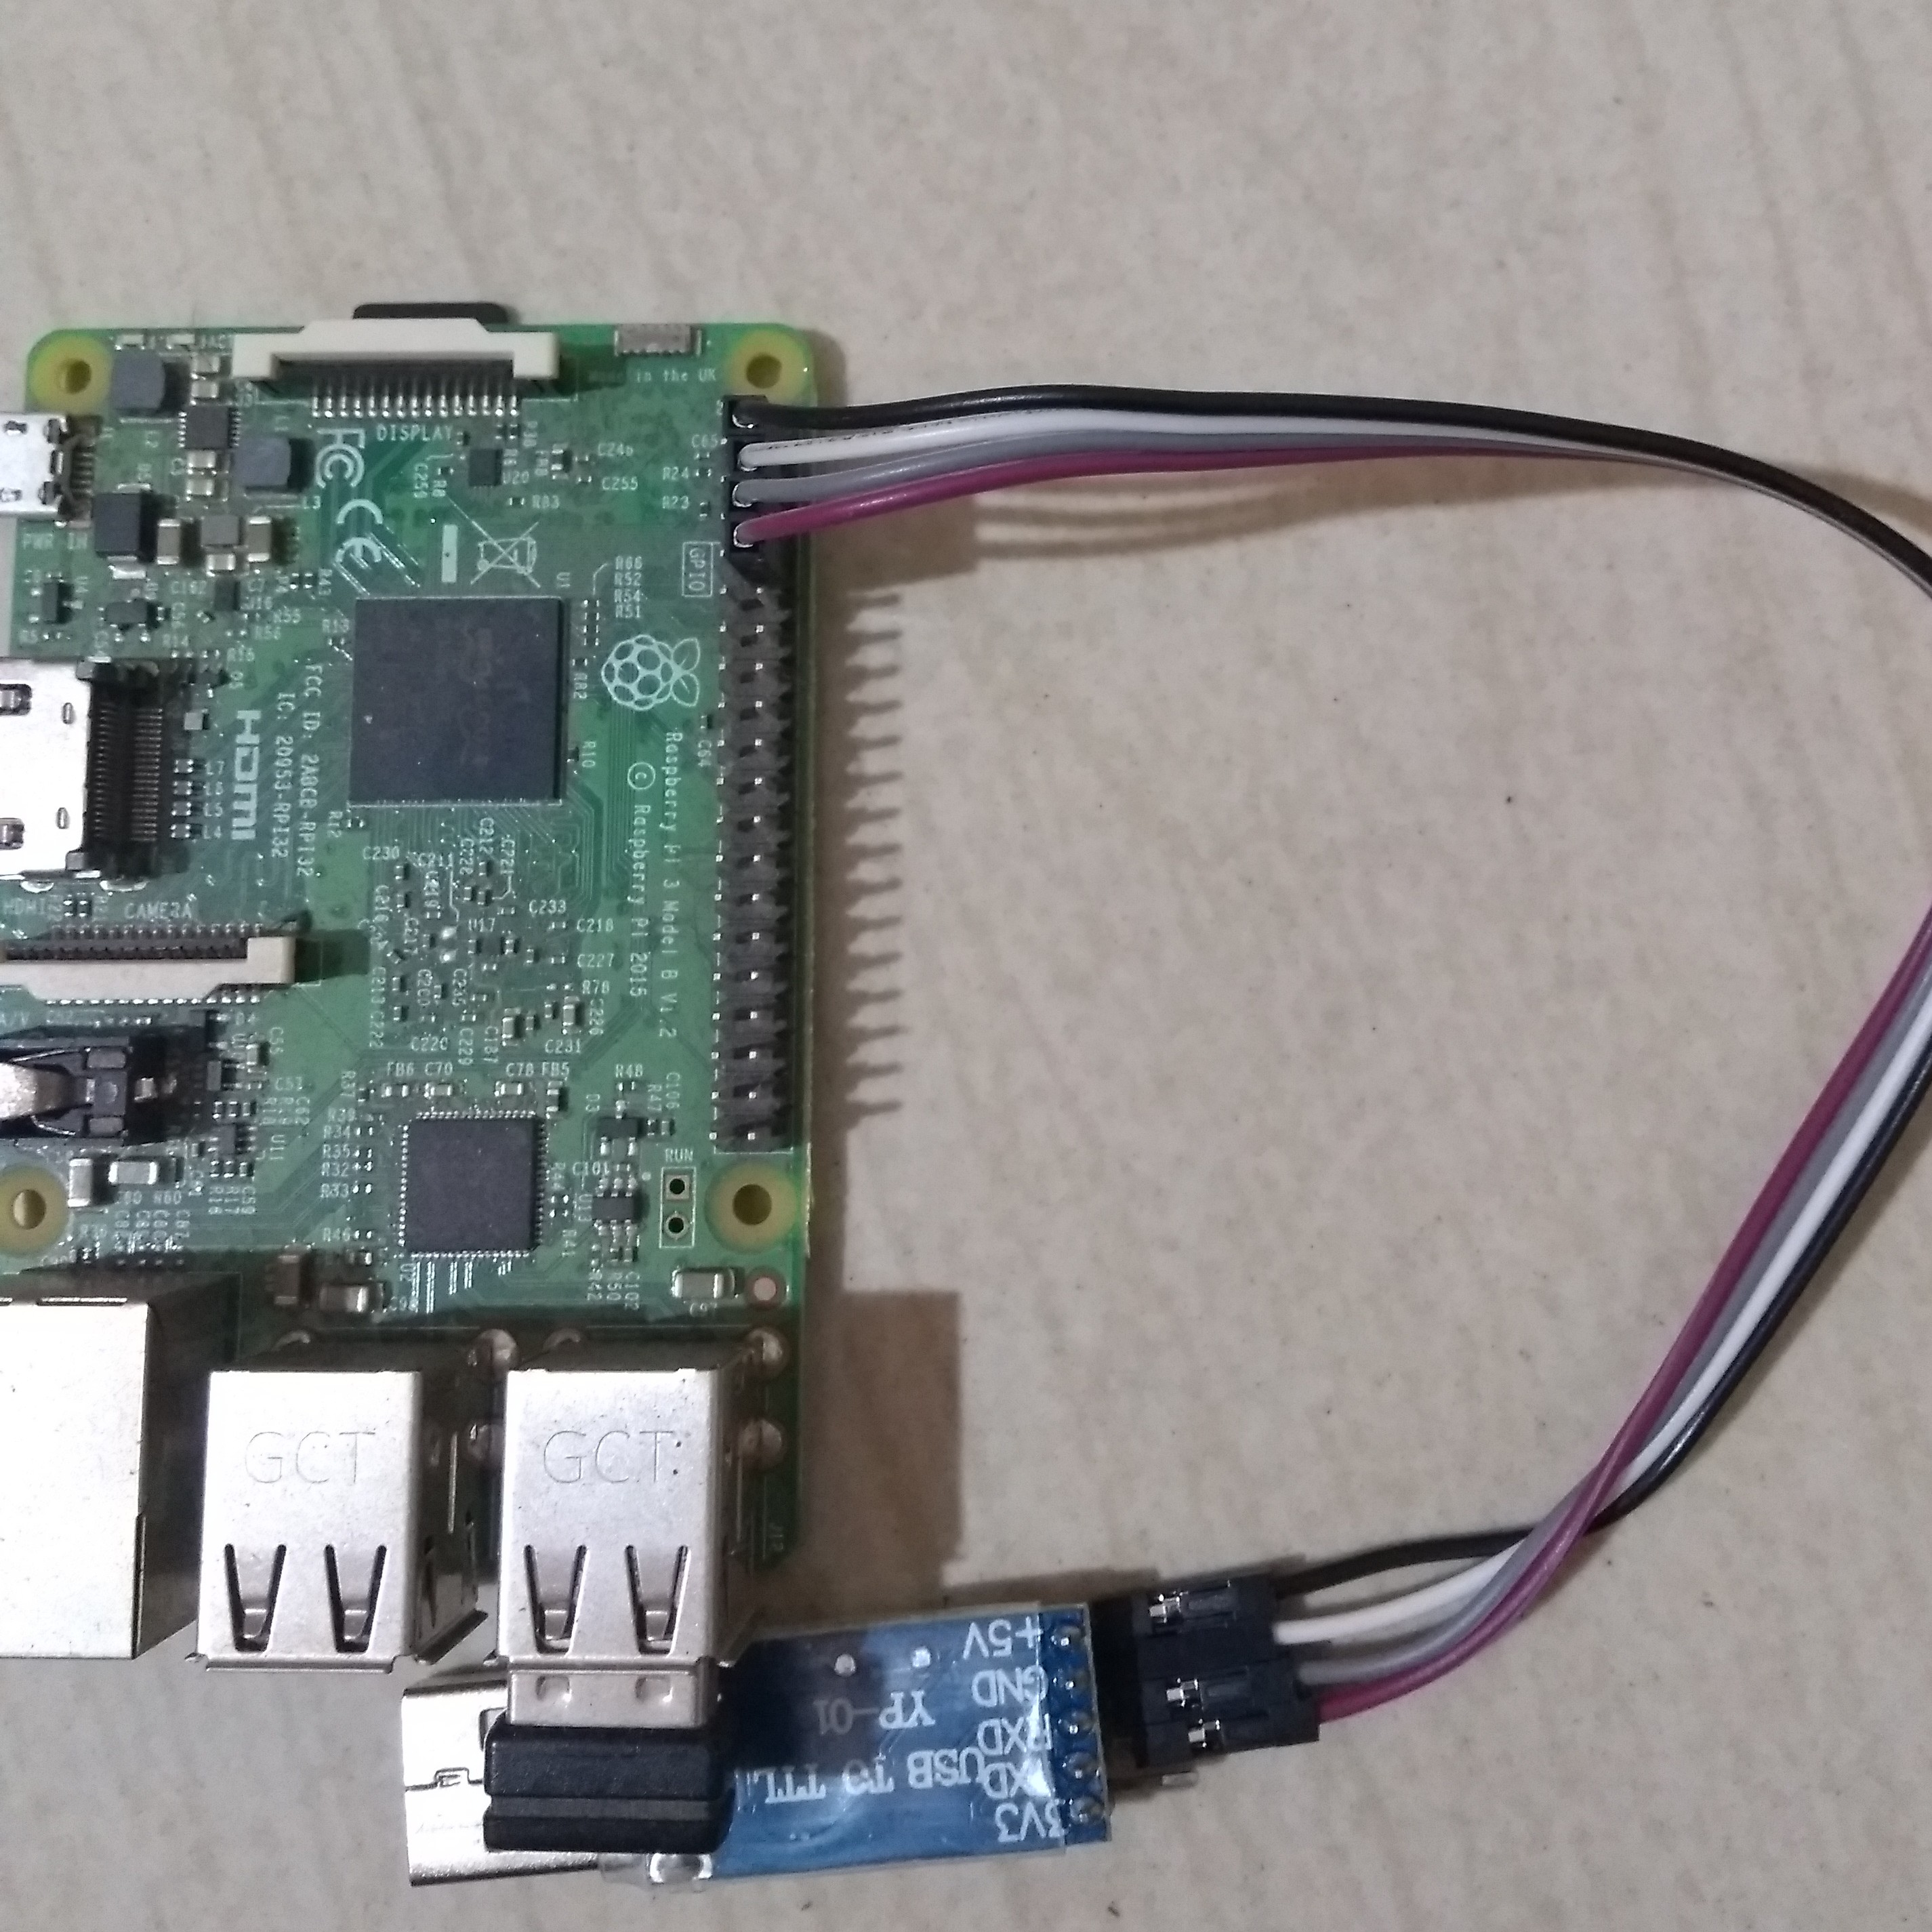 Raspberry Pi 3 serial connection